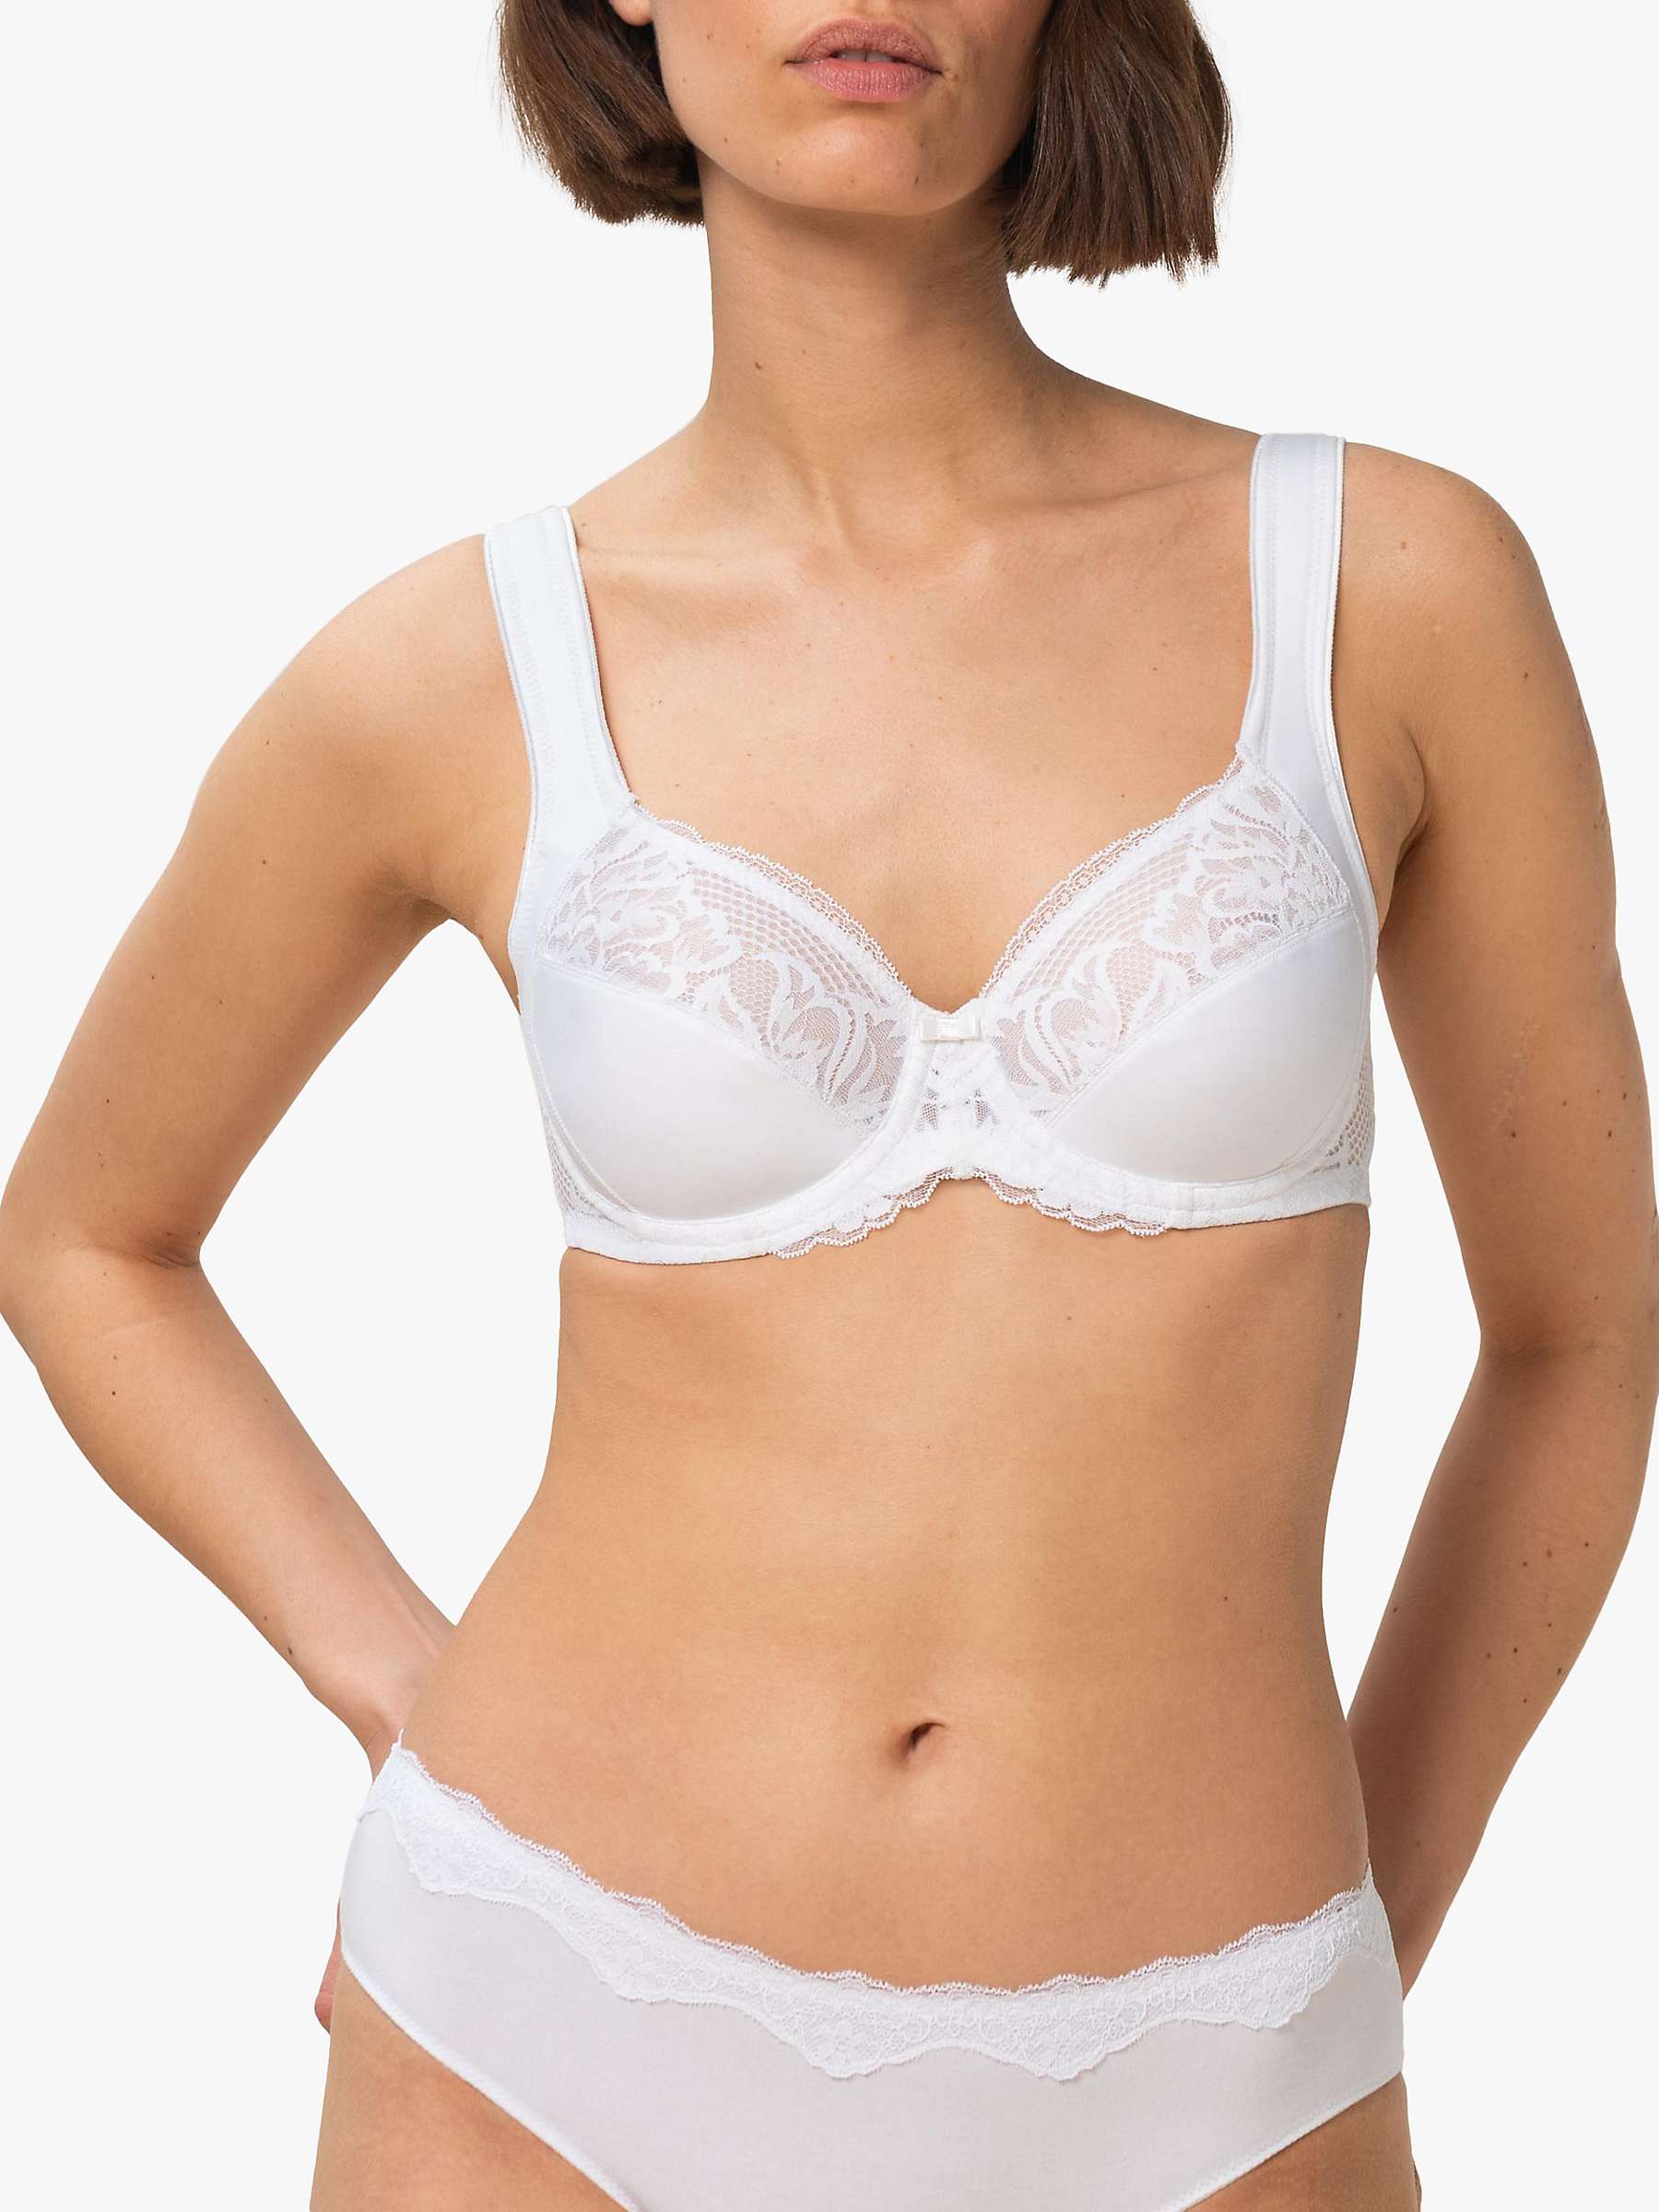 Buy Triumph Modern Lace & Cotton Full Cup Bra Online at johnlewis.com